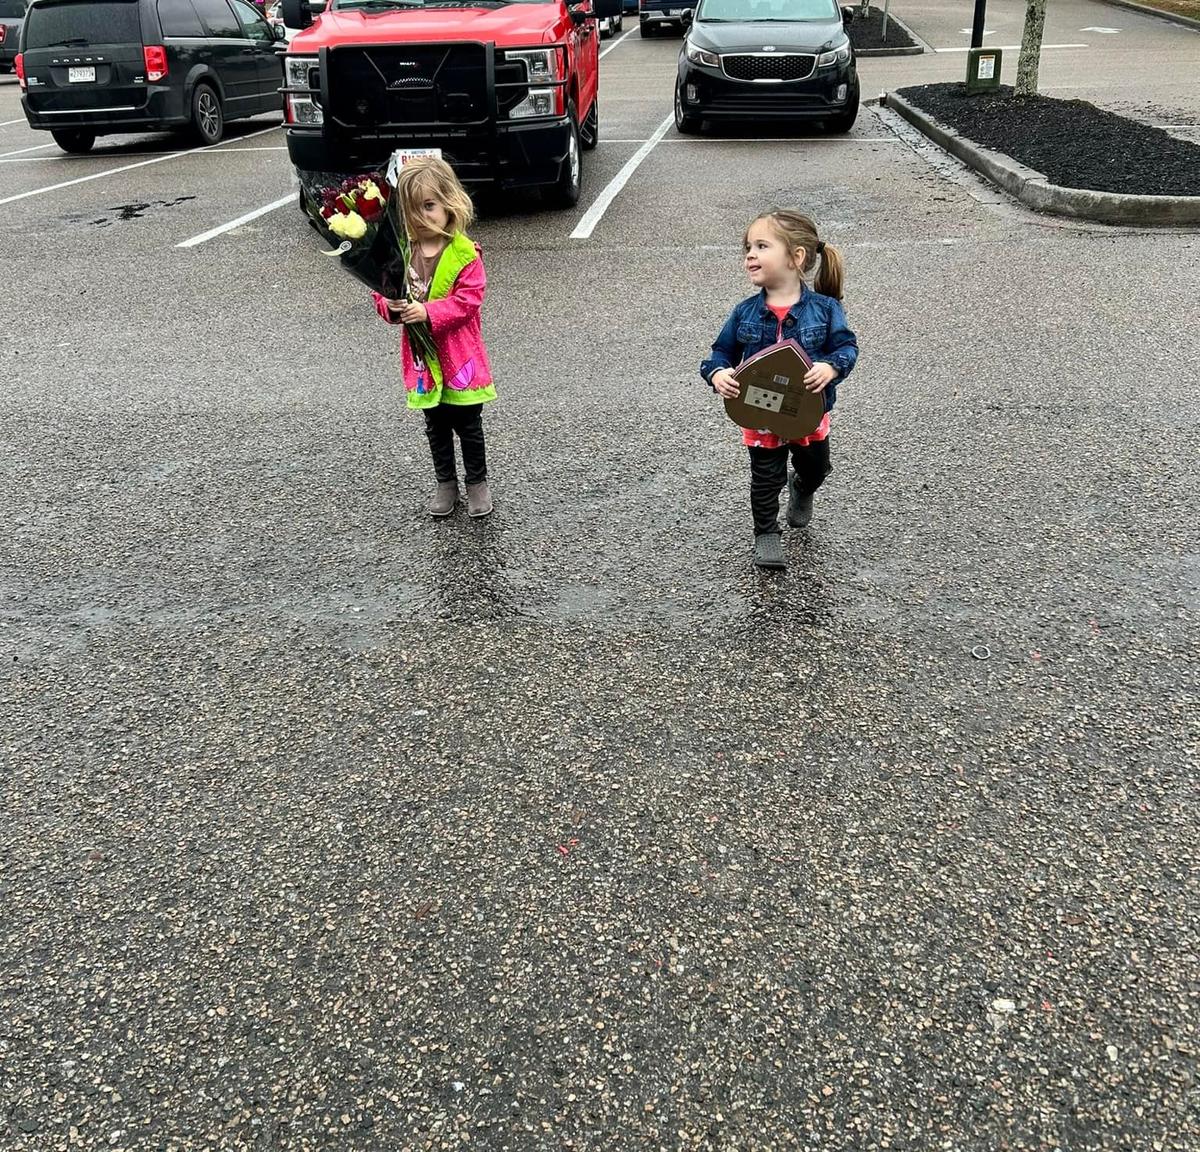 Lacey and Kevin's kids deliver flowers and candy to Gillespie. (Courtesy of Lacey Keighron)